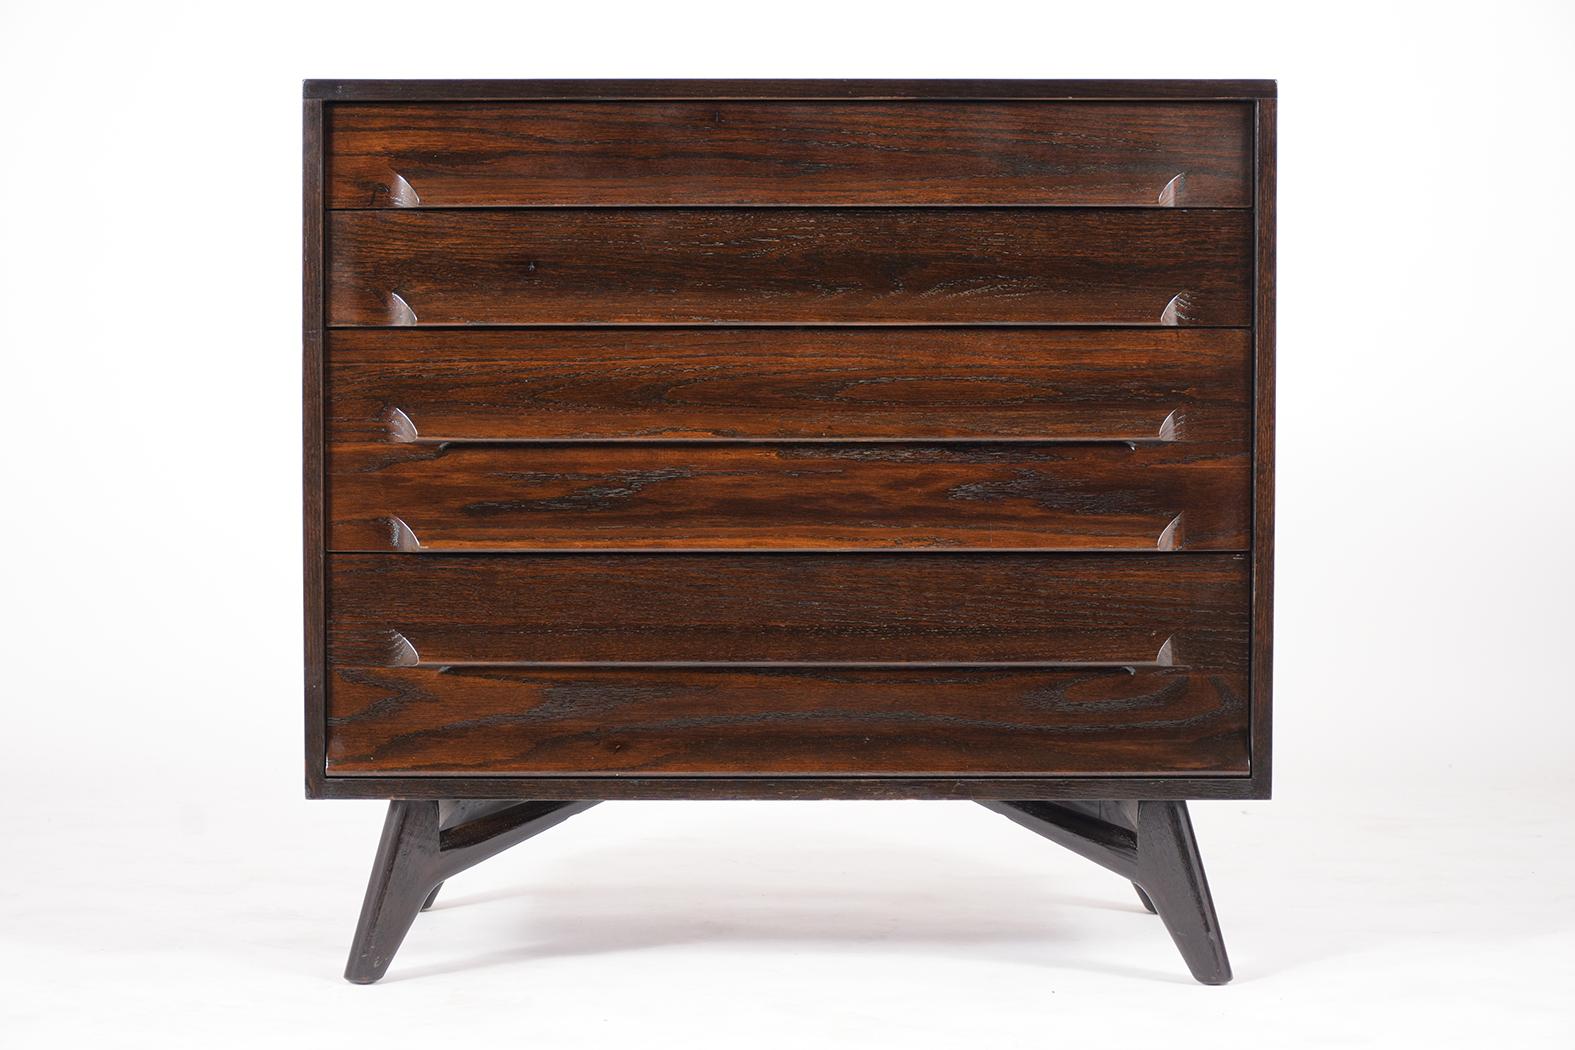 This is a 1950s chest of drawers by Jack Van der Molen for New York Furniture Exhibit Corp has been newly restored and is in great condition. The dresser is made out of teak wood stained in a dark color satin with a lacquered finish and features